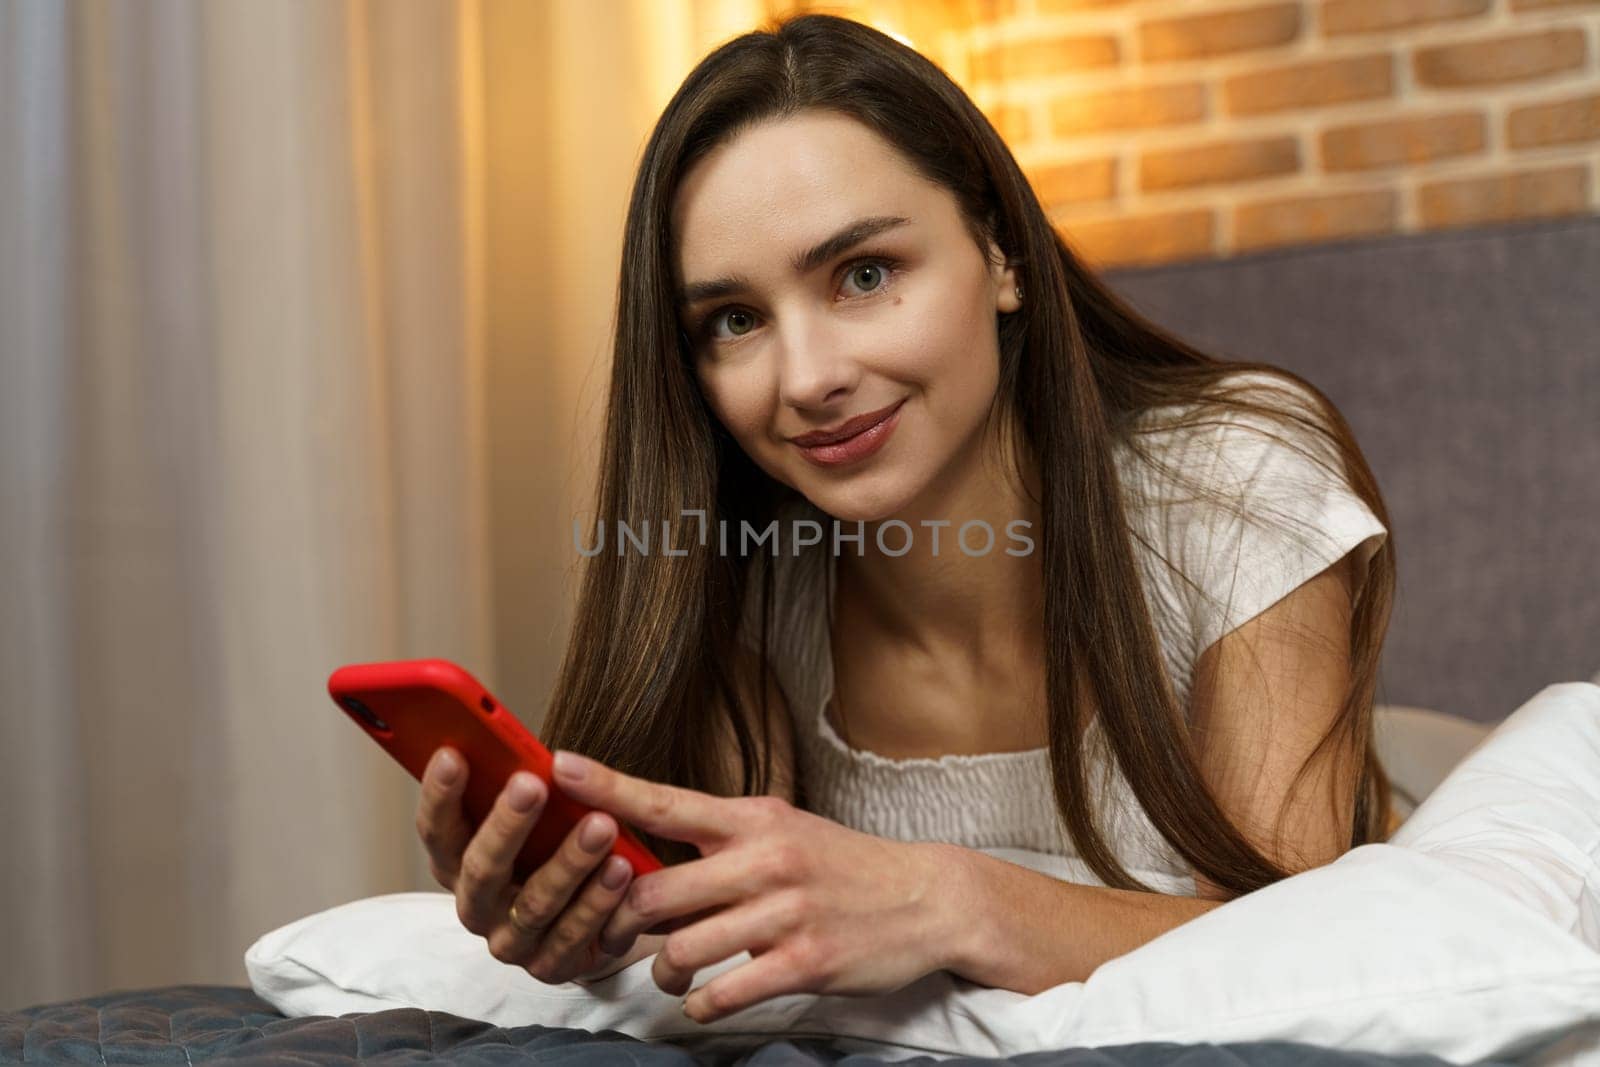 Portrait of a young woman who lies with a smartphone in her hands in the evening on the bed. Looking at the camera